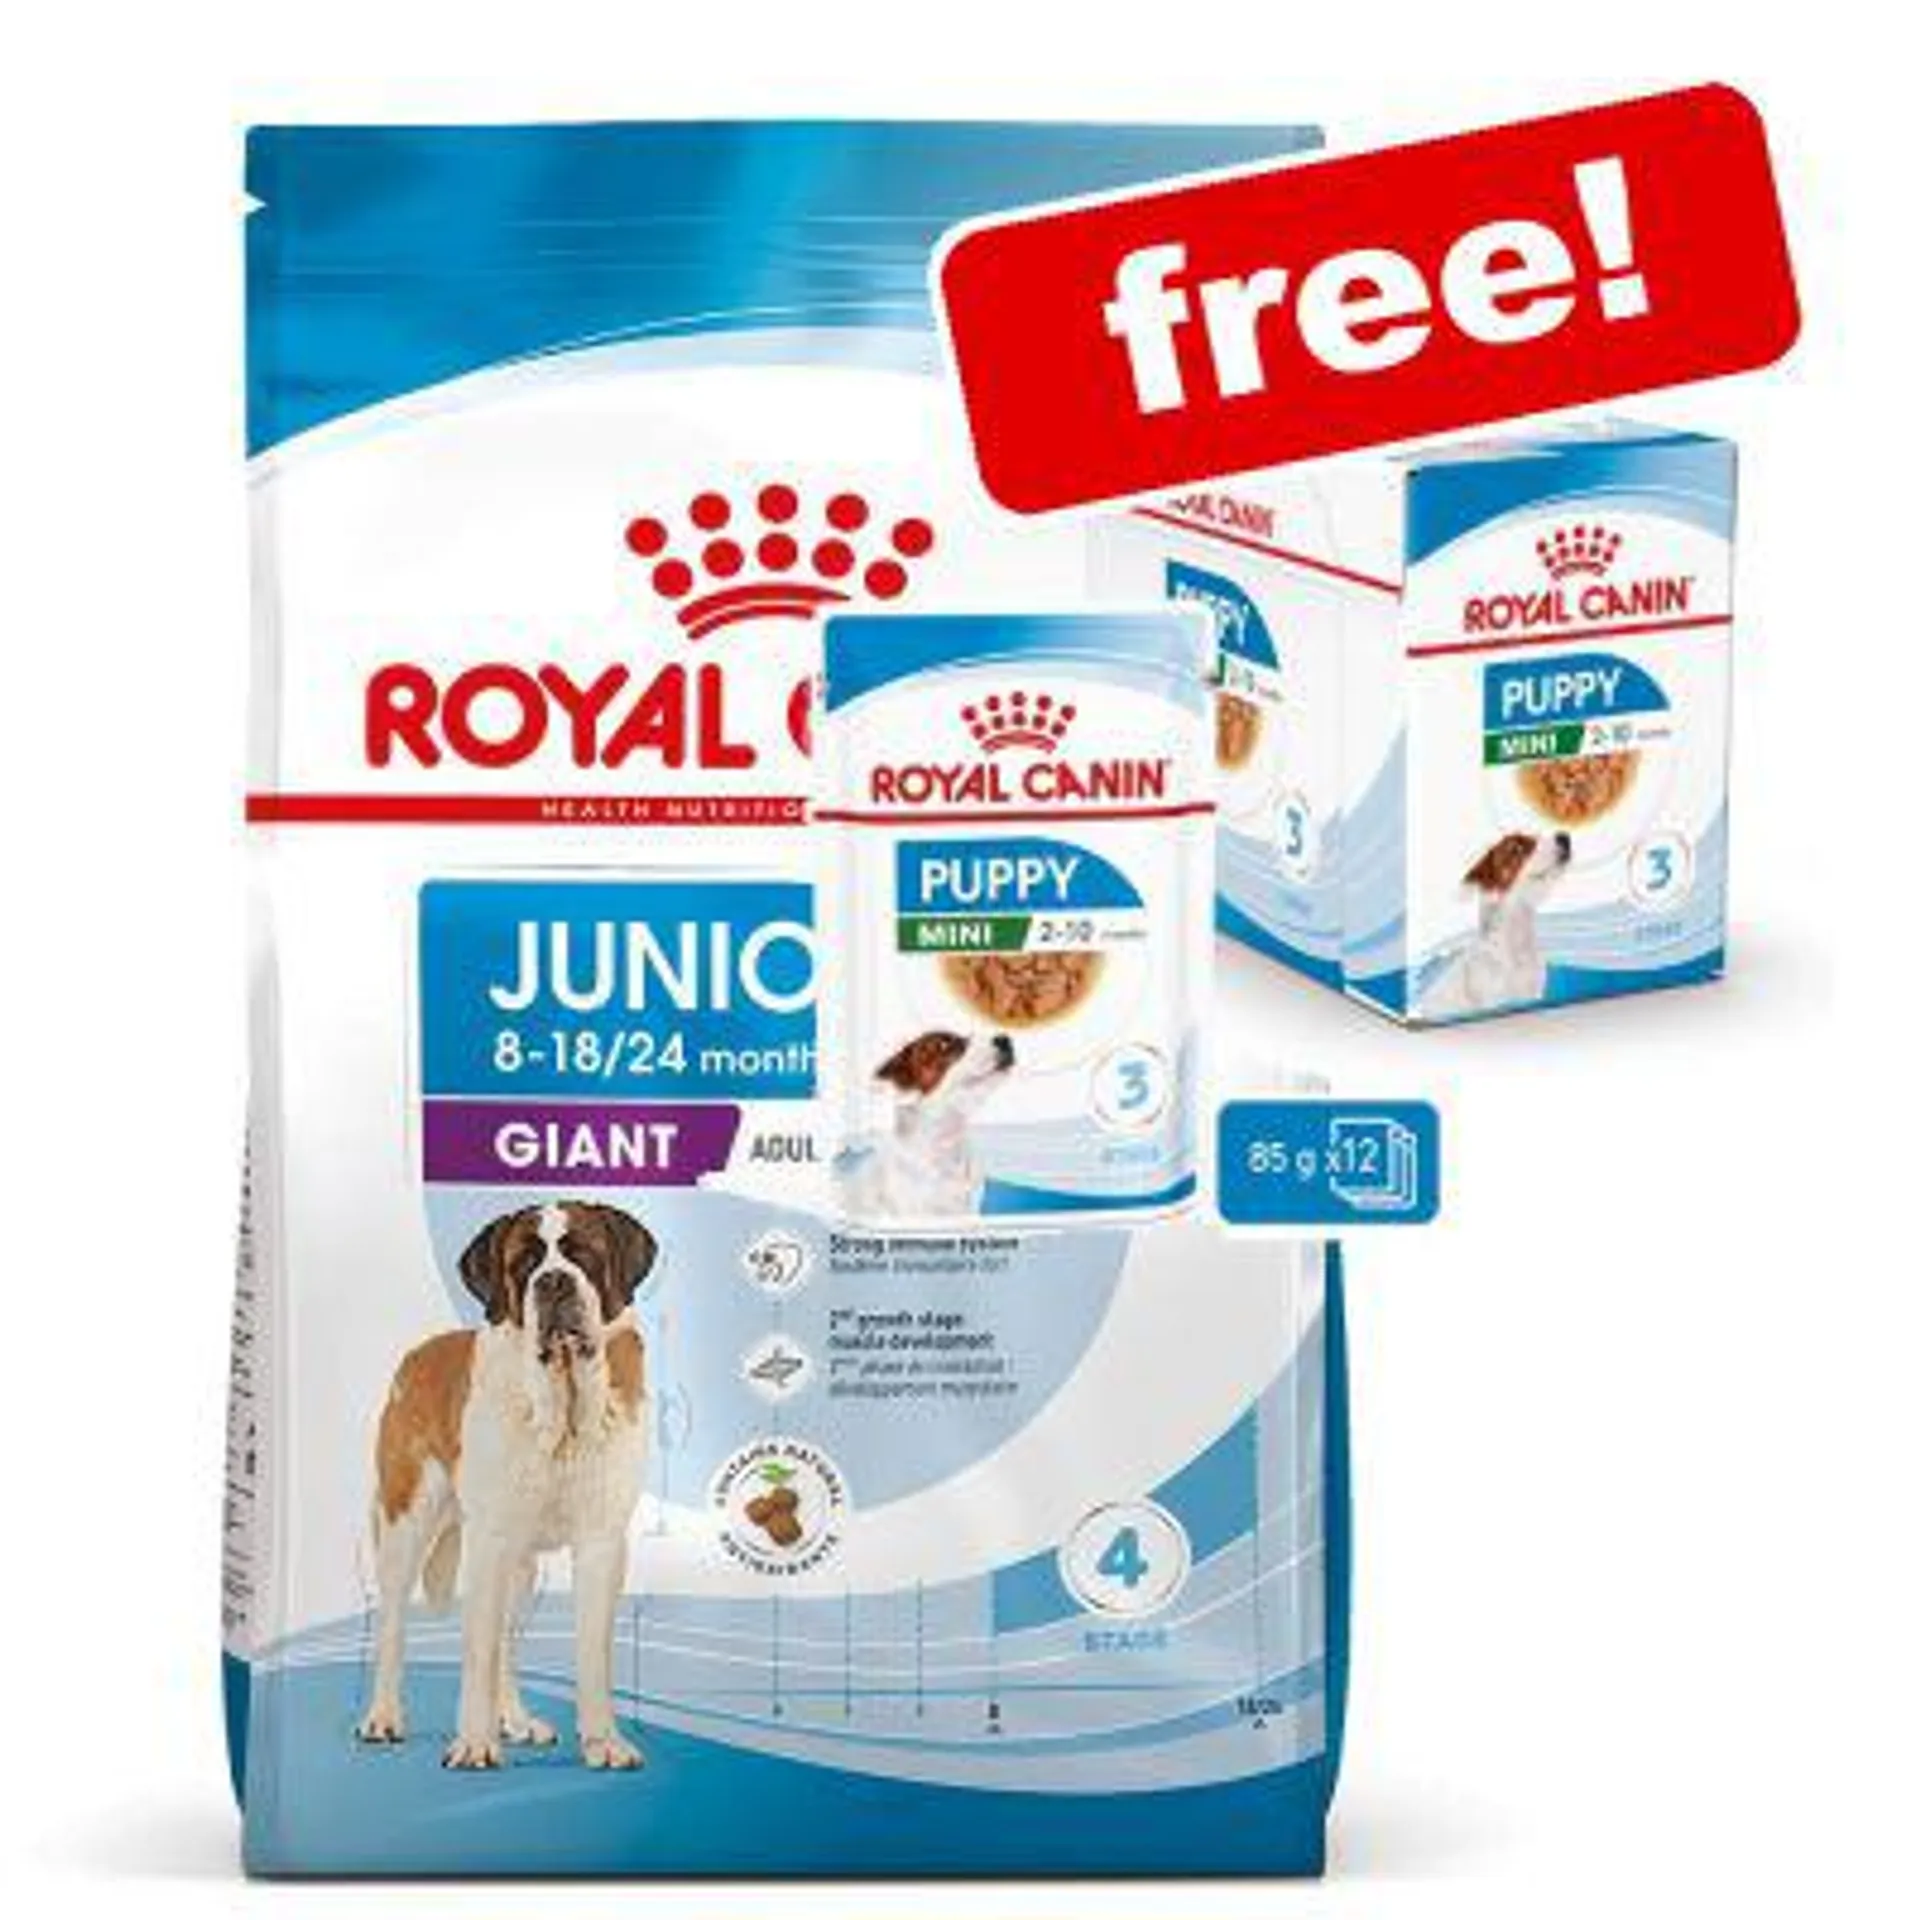 Royal Canin Puppy/Junior Dry Dog Food + Wet Food Free!*